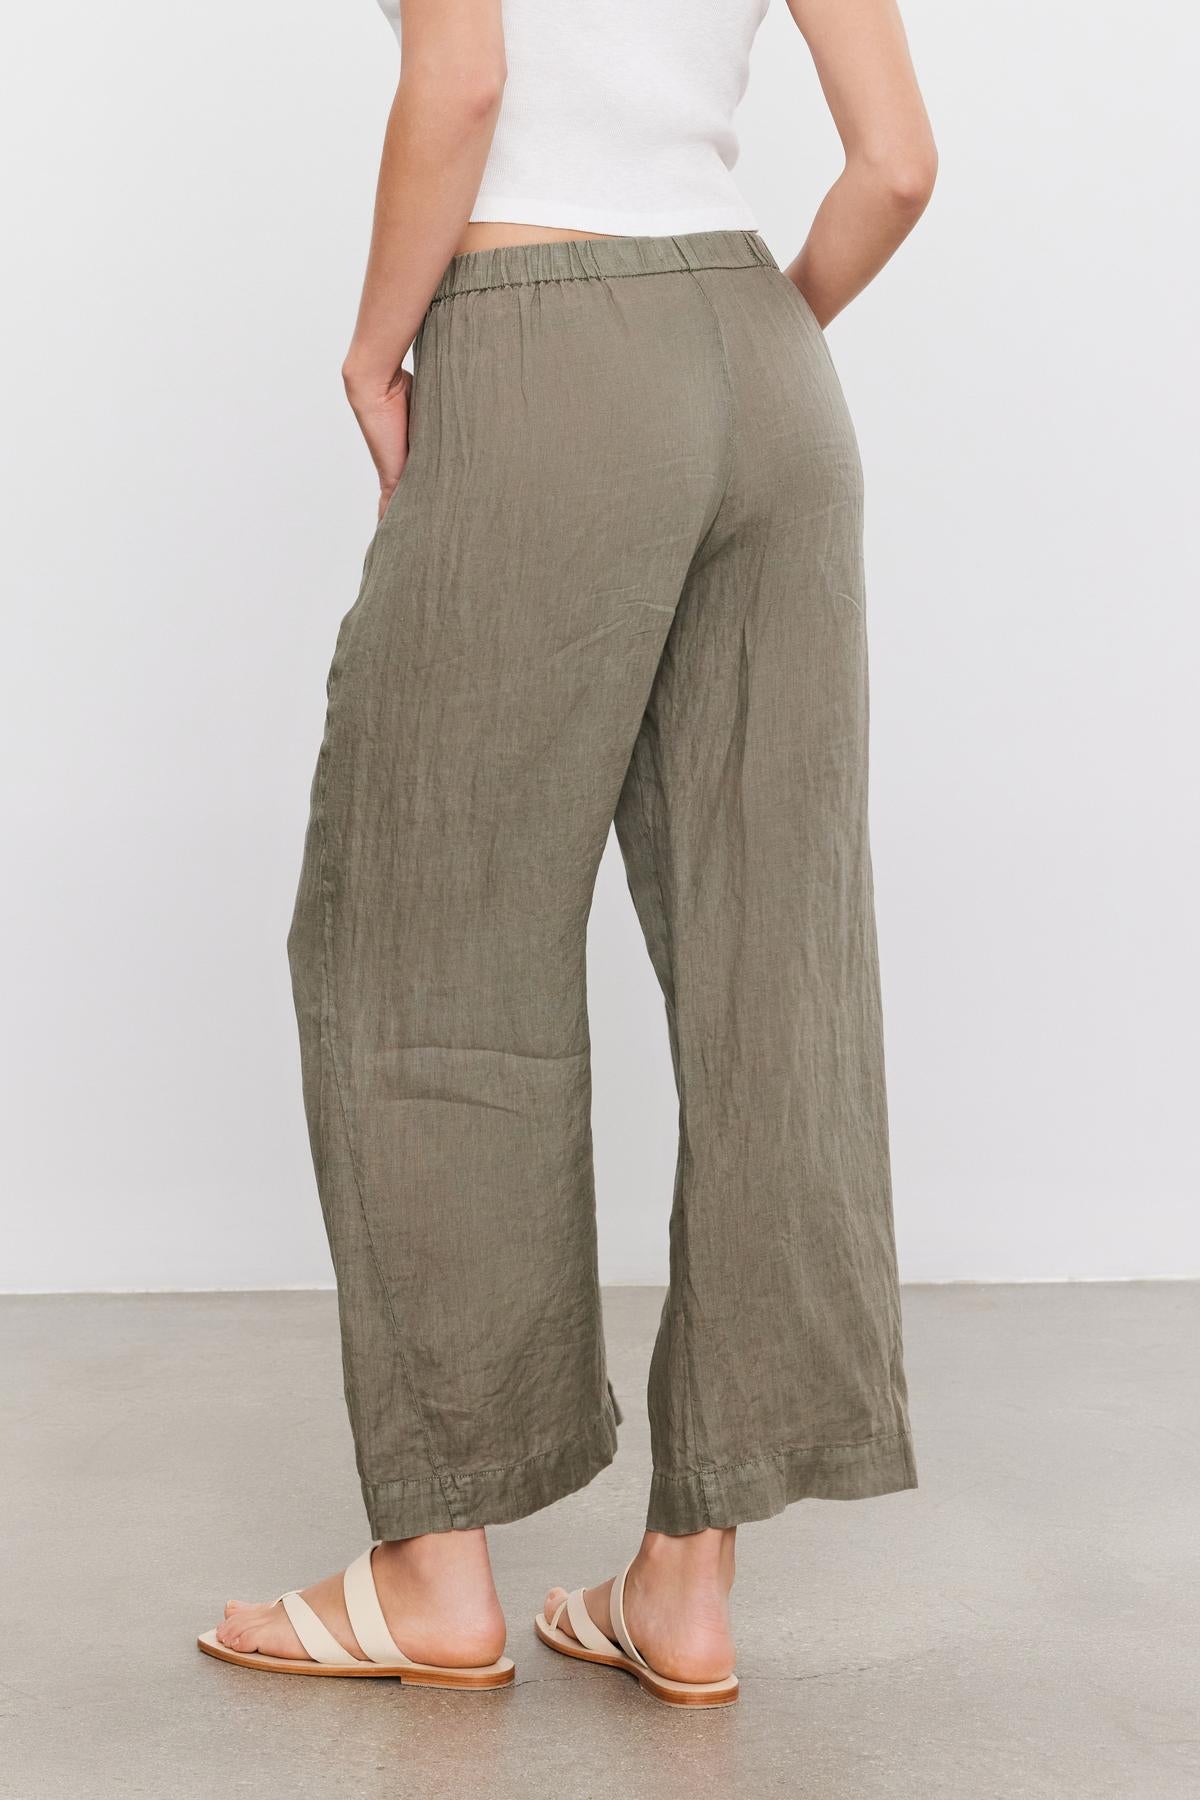 Rear view of a person wearing loose-fitting, lightweight LOLA LINEN PANT by Velvet by Graham & Spencer in olive green, a white top, and beige sandals, standing against a plain white background.-36910042972353